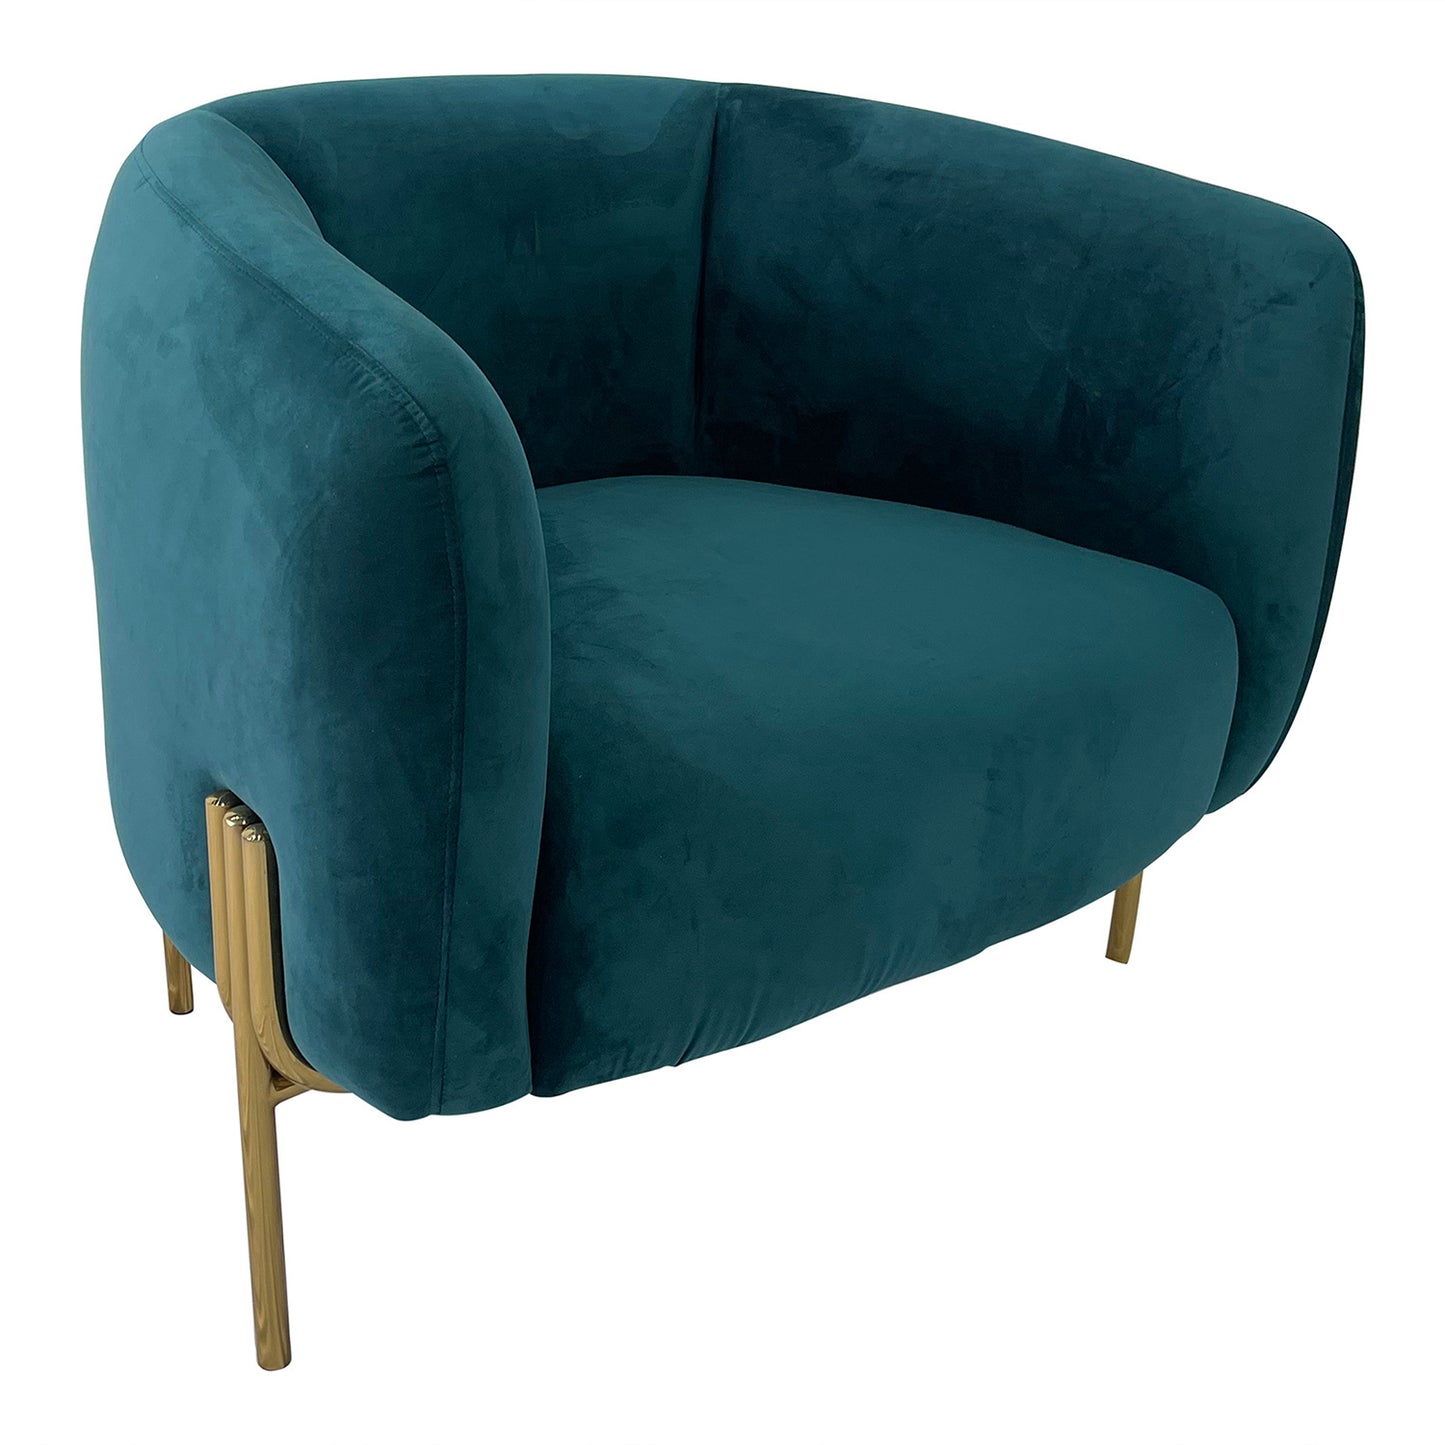 Navy Teal and Gold Sofa Chair - Enova Luxe Home Store